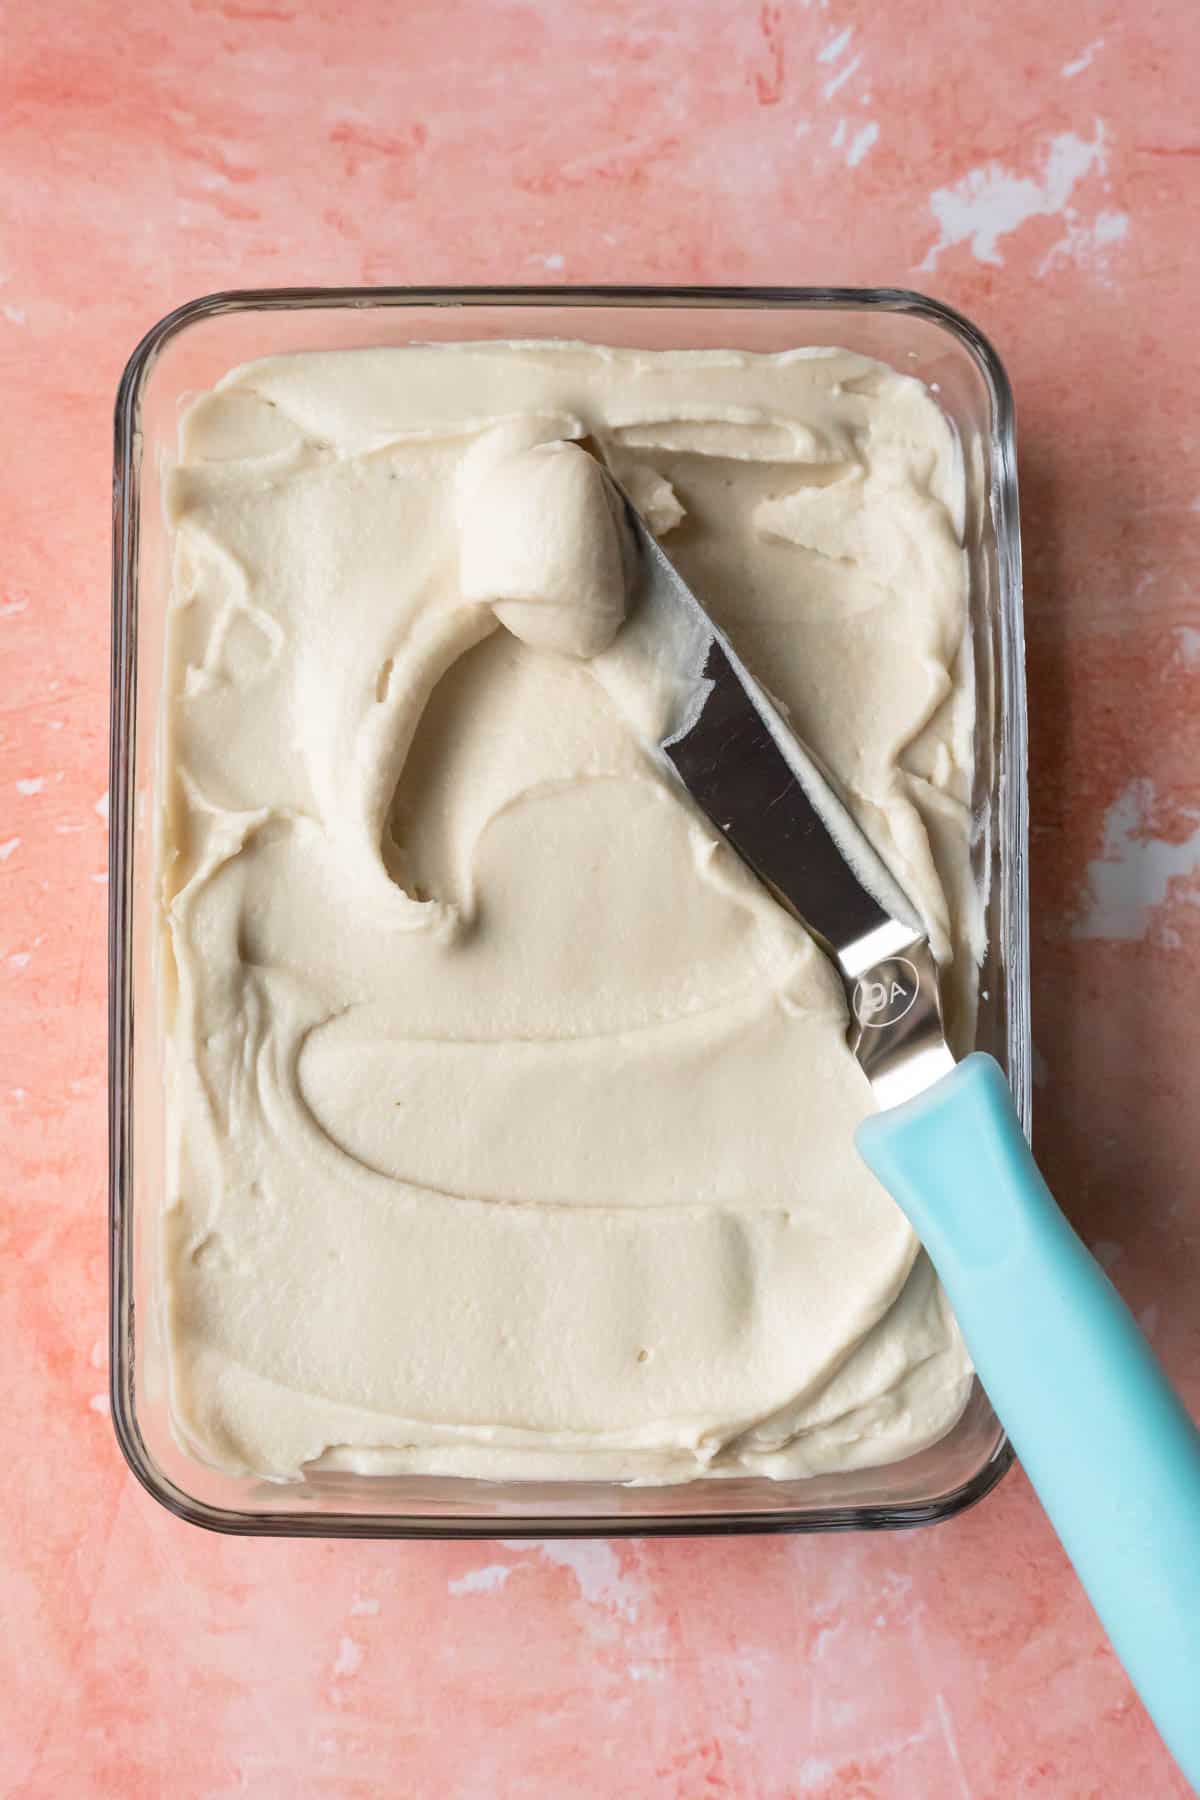 An offset spatula spreading the almond flour frosting in a glass dish to chill.